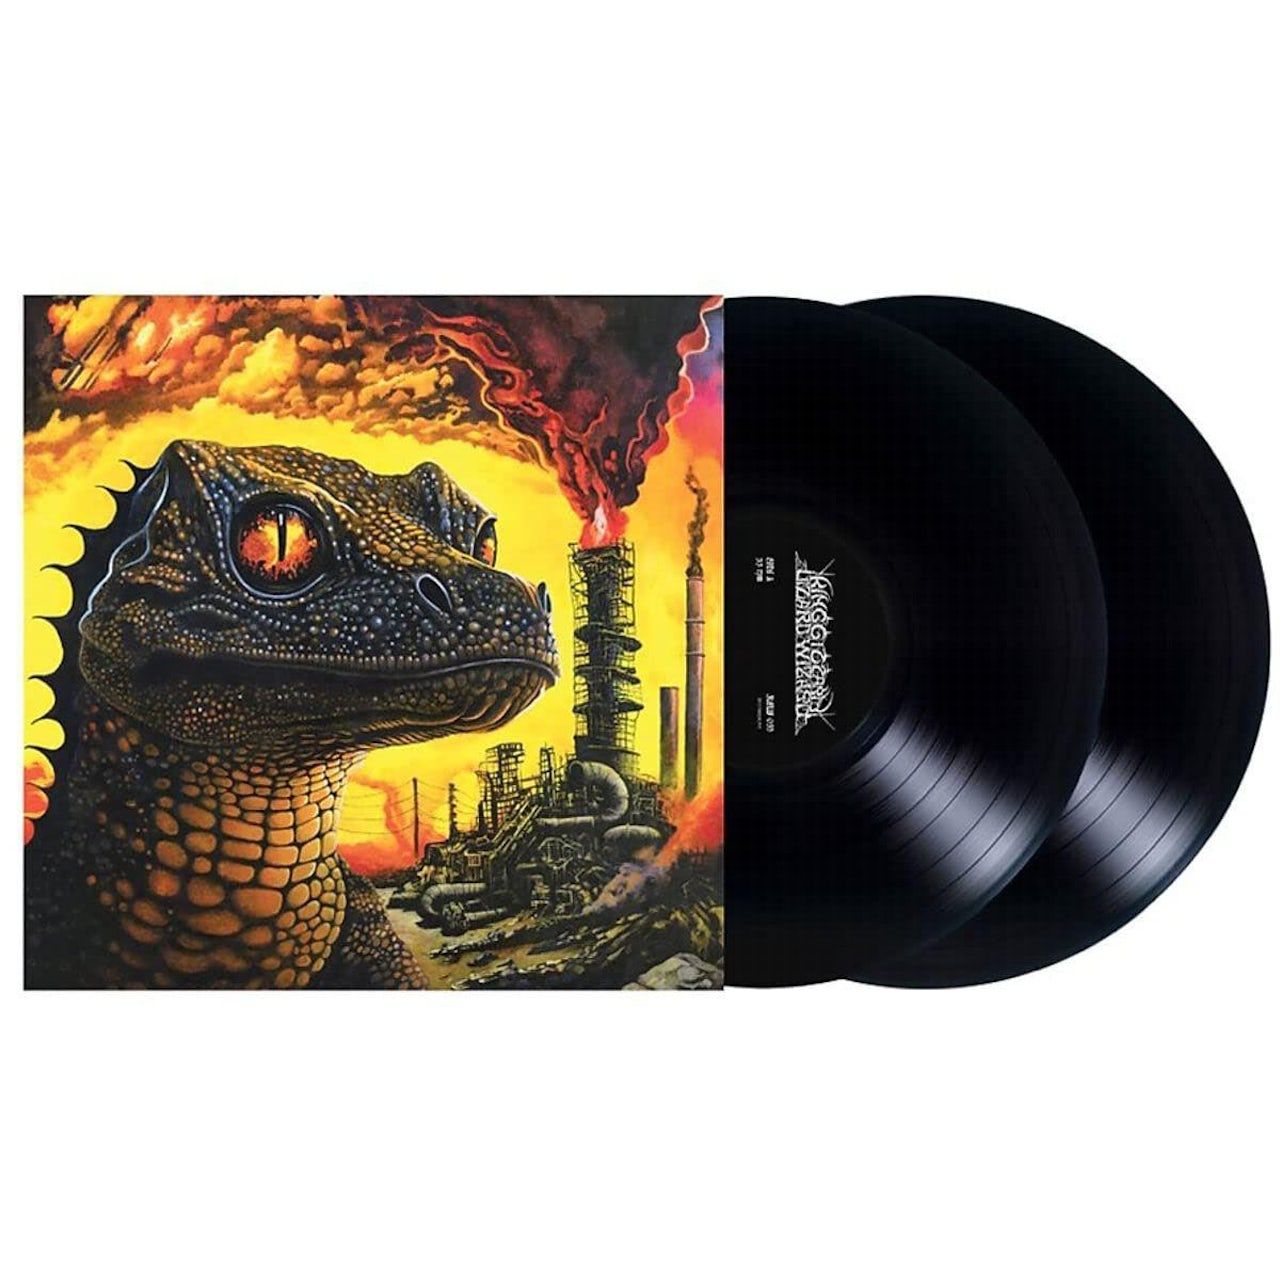 0842812189524, Виниловая пластинка King Gizzard & The Lizard Wizard, Petrodragonic Apocalypse; Or, Dawn Of Eternal Night: An Annihilation Of Planet Earth And The Beginning Of Merciless Damnation (coloured) king gizzard and the lizard wizard cd king gizzard and the lizard wizard gumboot soup